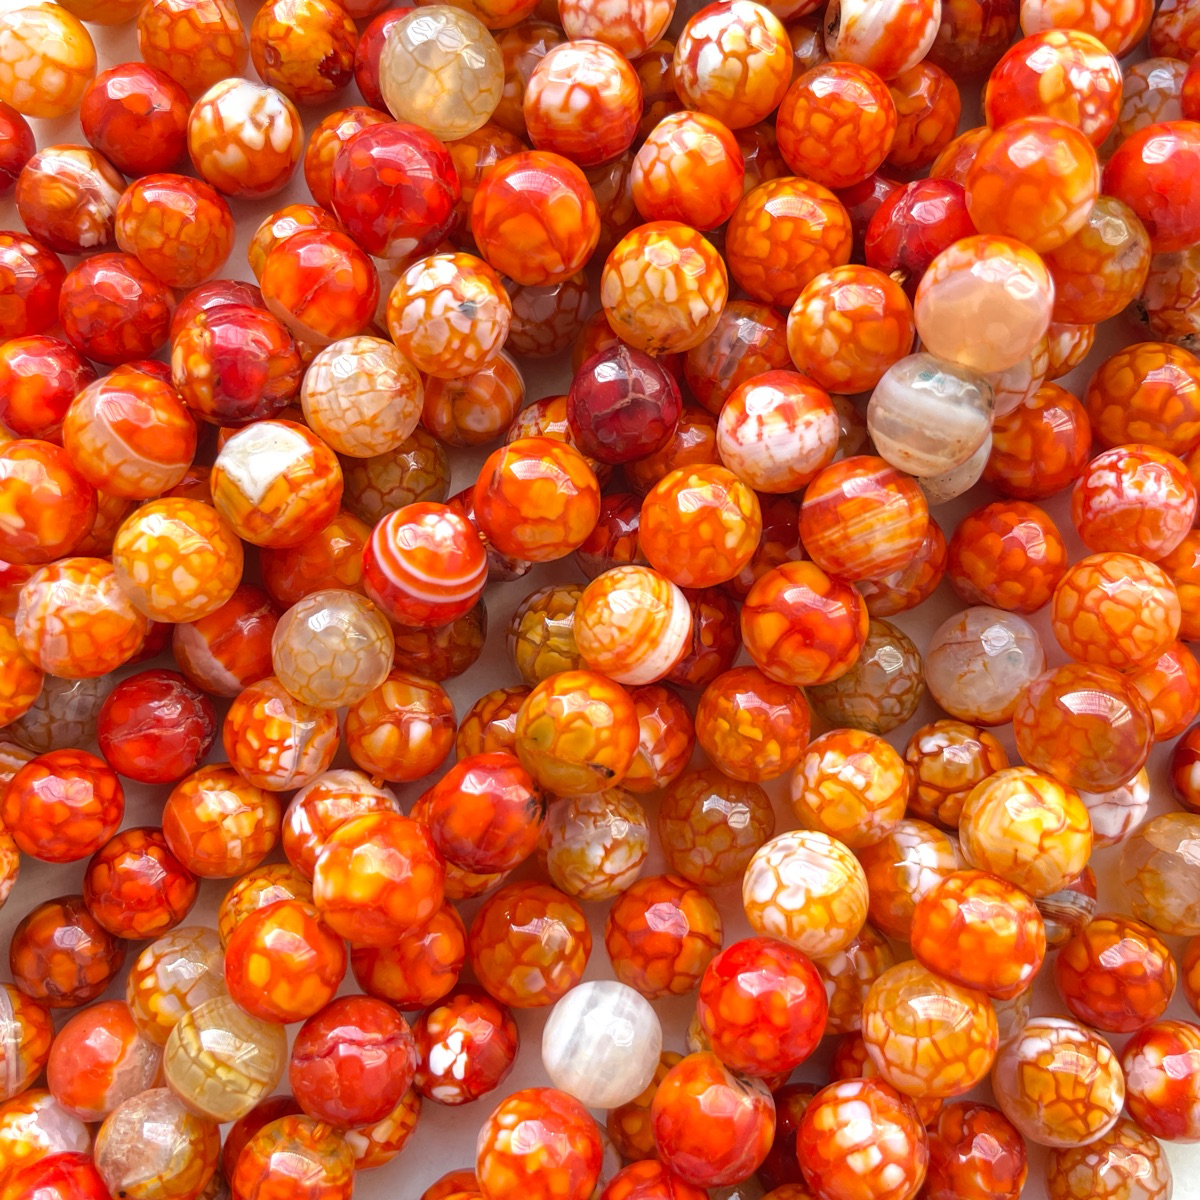 2 Strands/lot 10mm Colorful Cracked Fire Agate Faceted Stone Beads Orange Stone Beads Faceted Agate Beads New Beads Arrivals Charms Beads Beyond